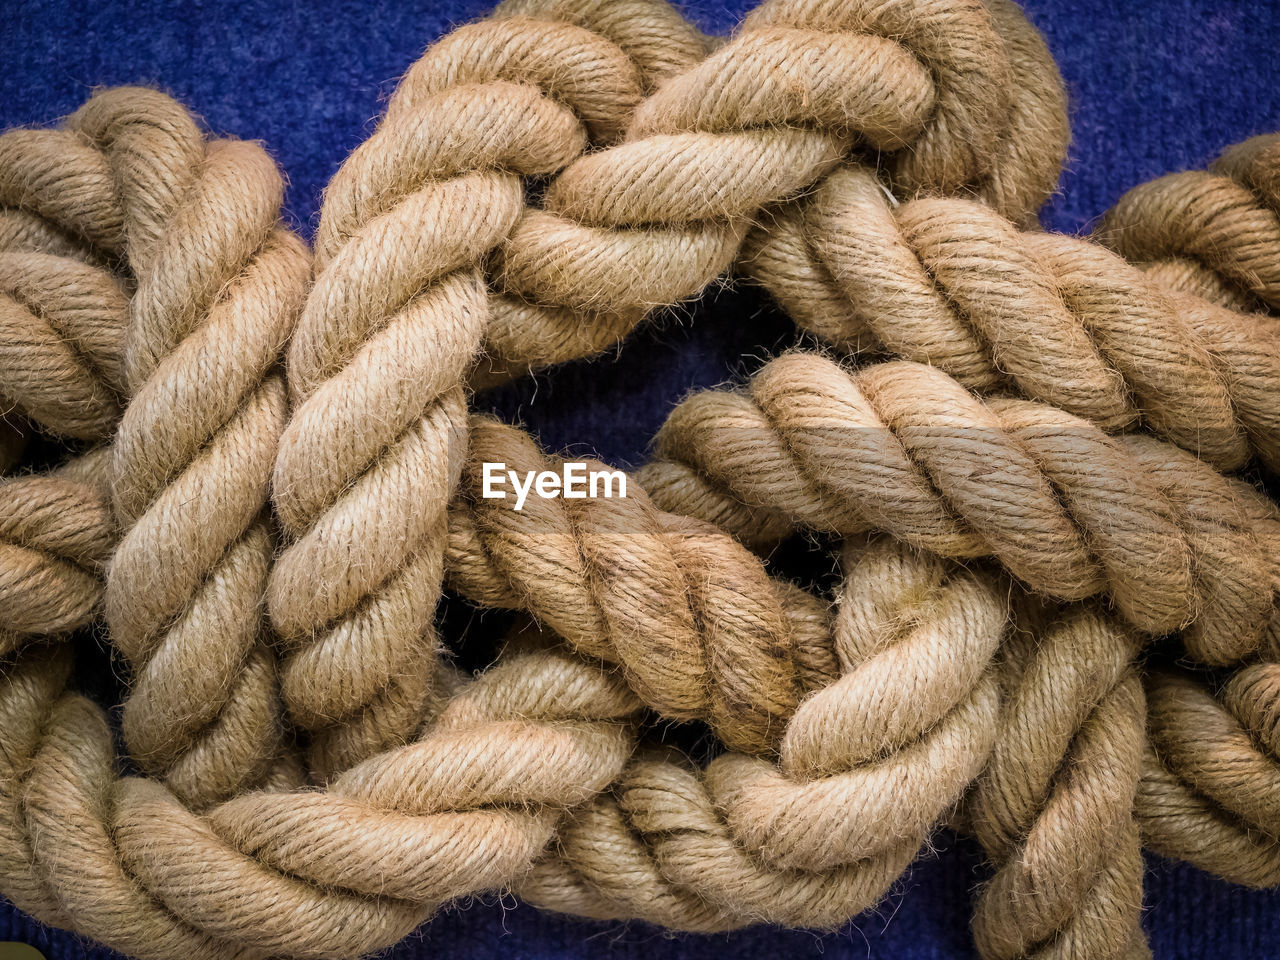 CLOSE-UP OF ROPE TIED UP ON BLUE